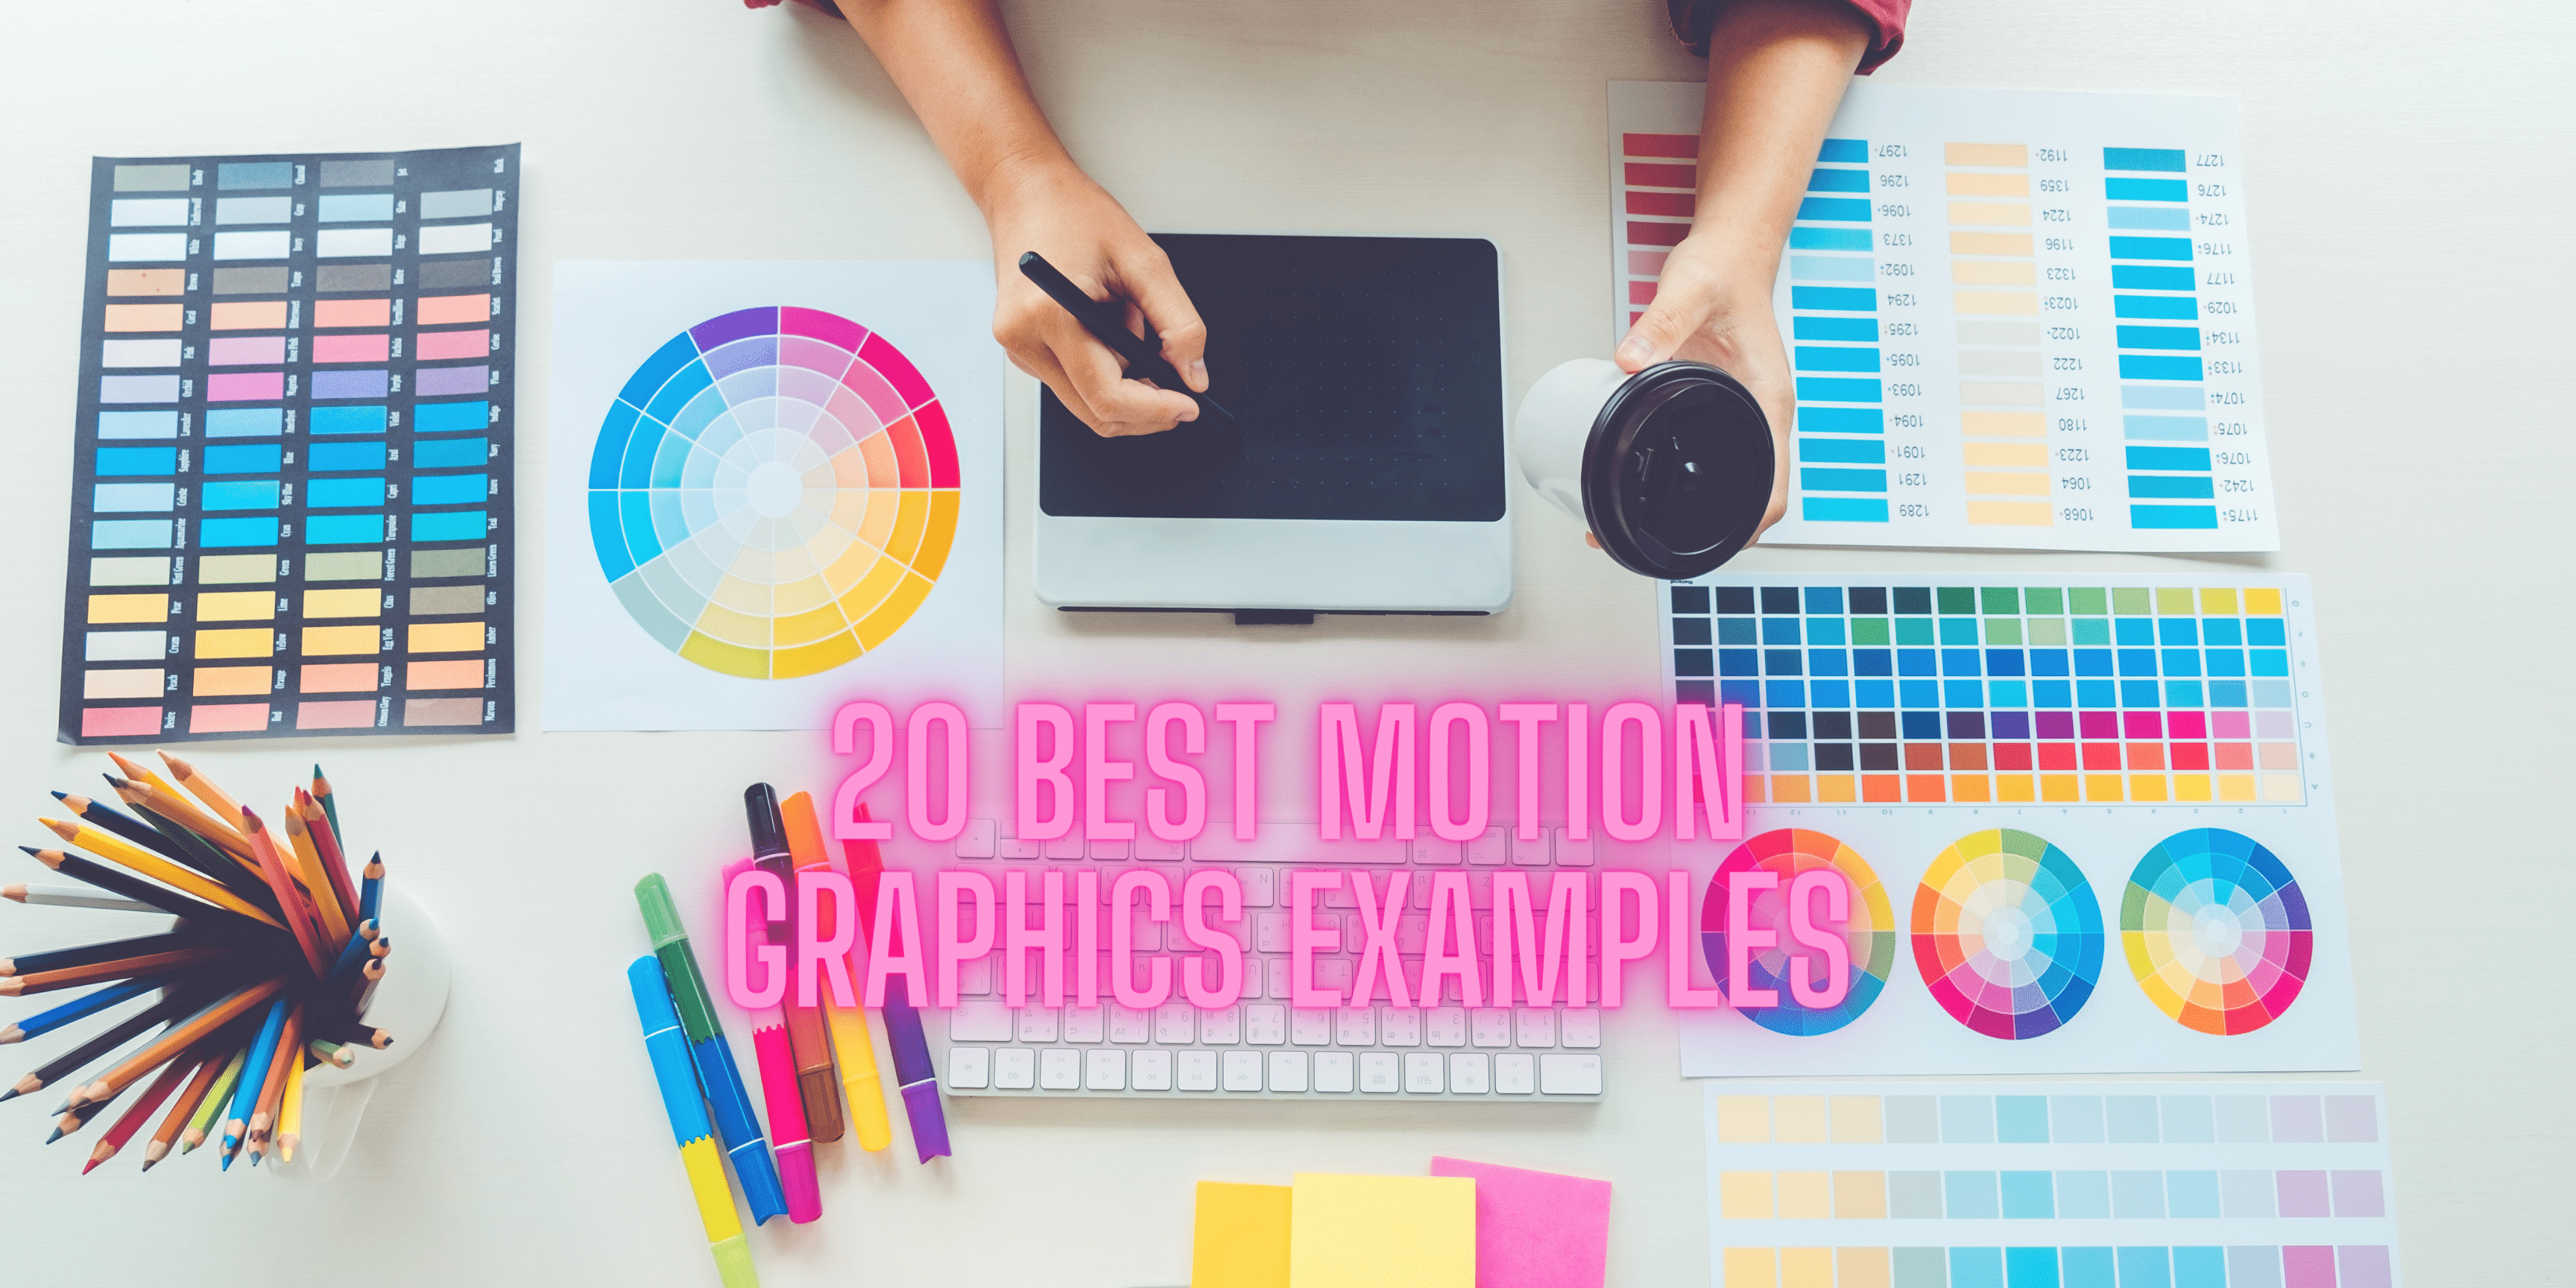 20 BEST MOTION GRAPHICS EXAMPLES